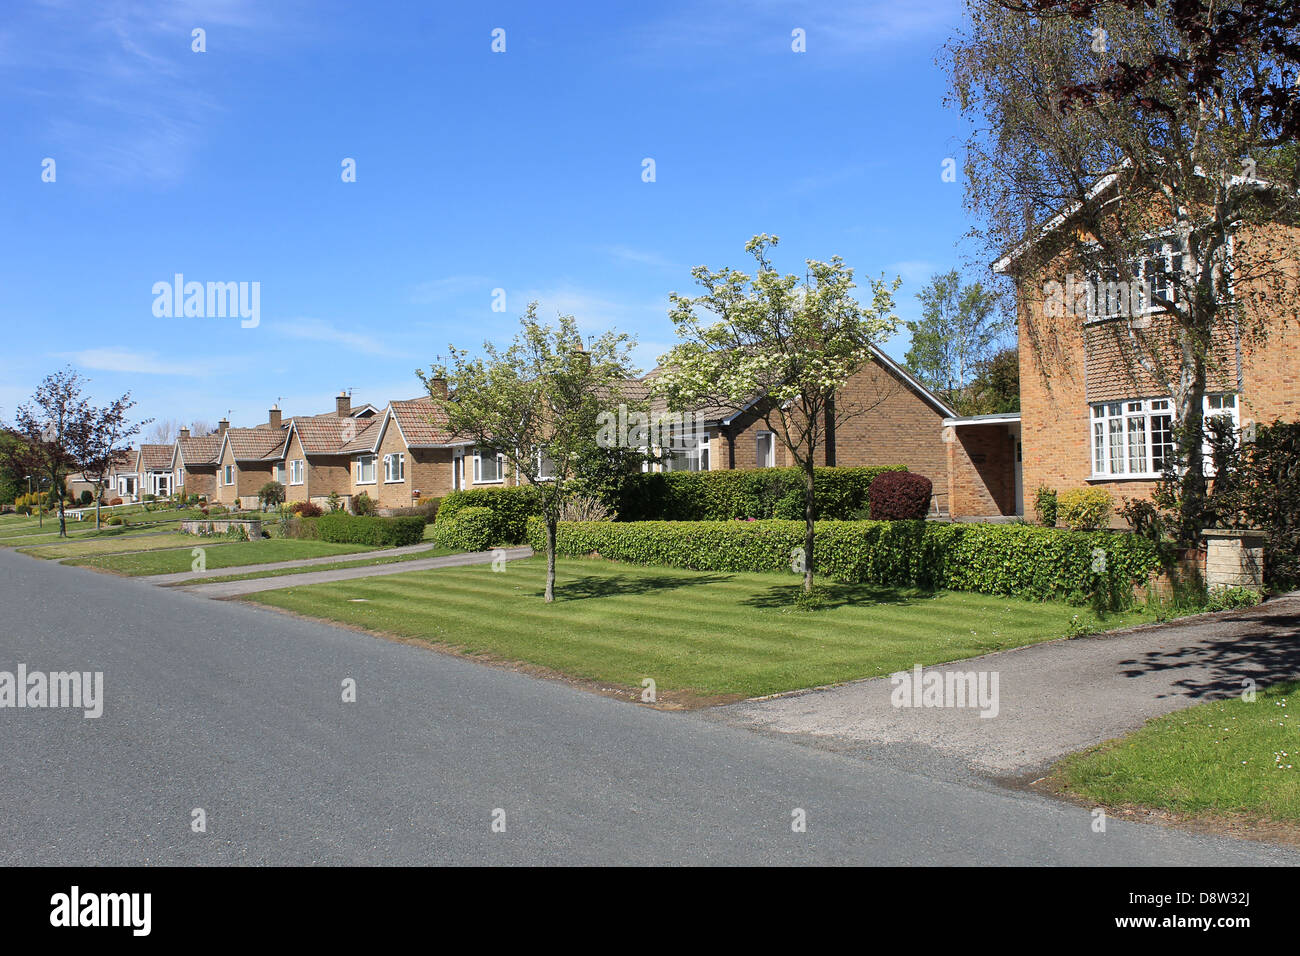 Row of houses and bungalows on English street in rural village. Stock Photo